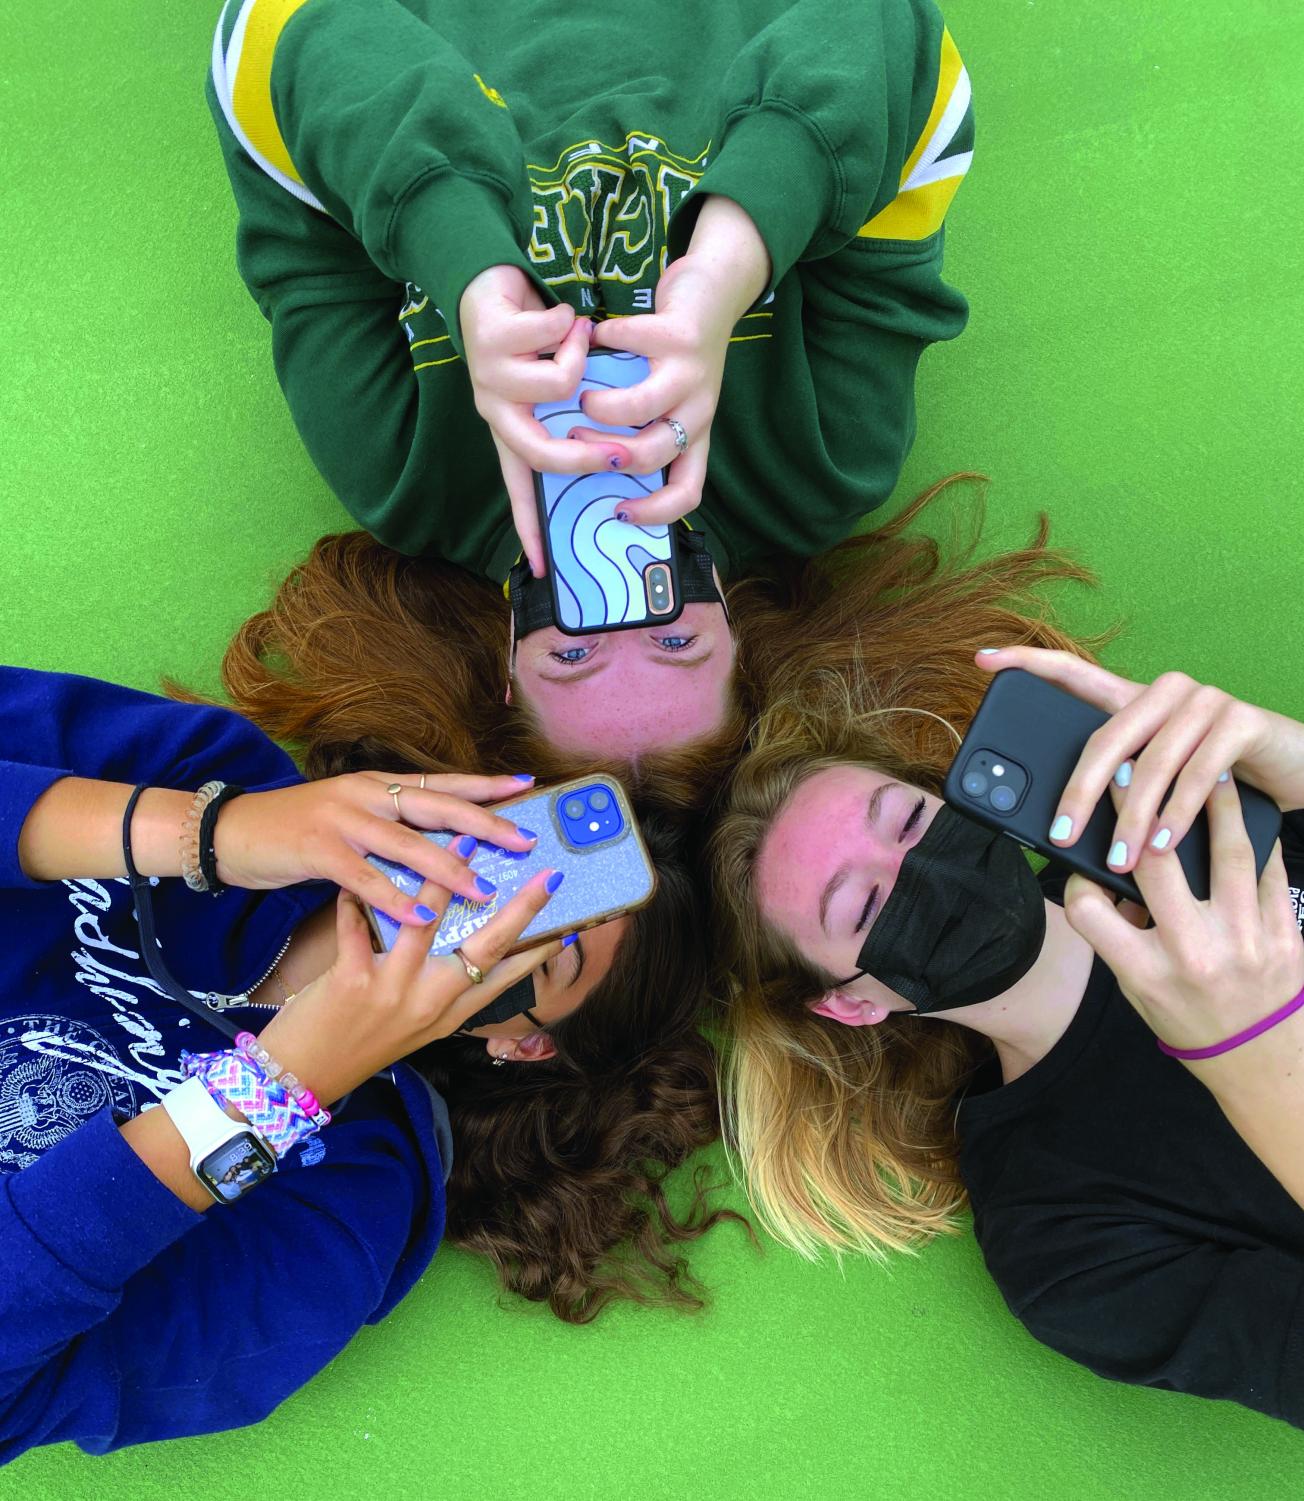 Photo illustration by Crystal Diaz.  Students laying in circle while using phones.